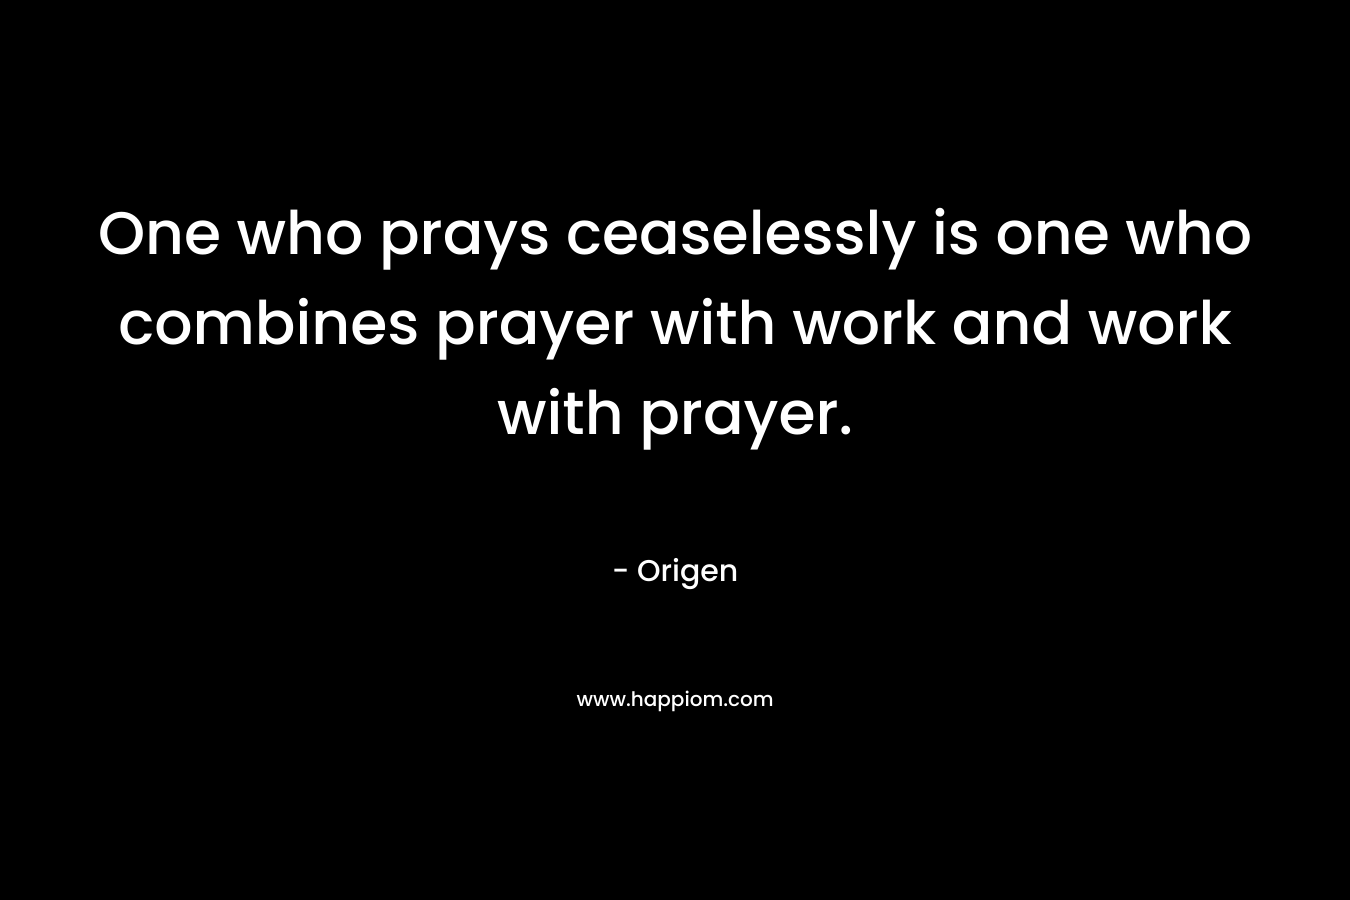 One who prays ceaselessly is one who combines prayer with work and work with prayer.